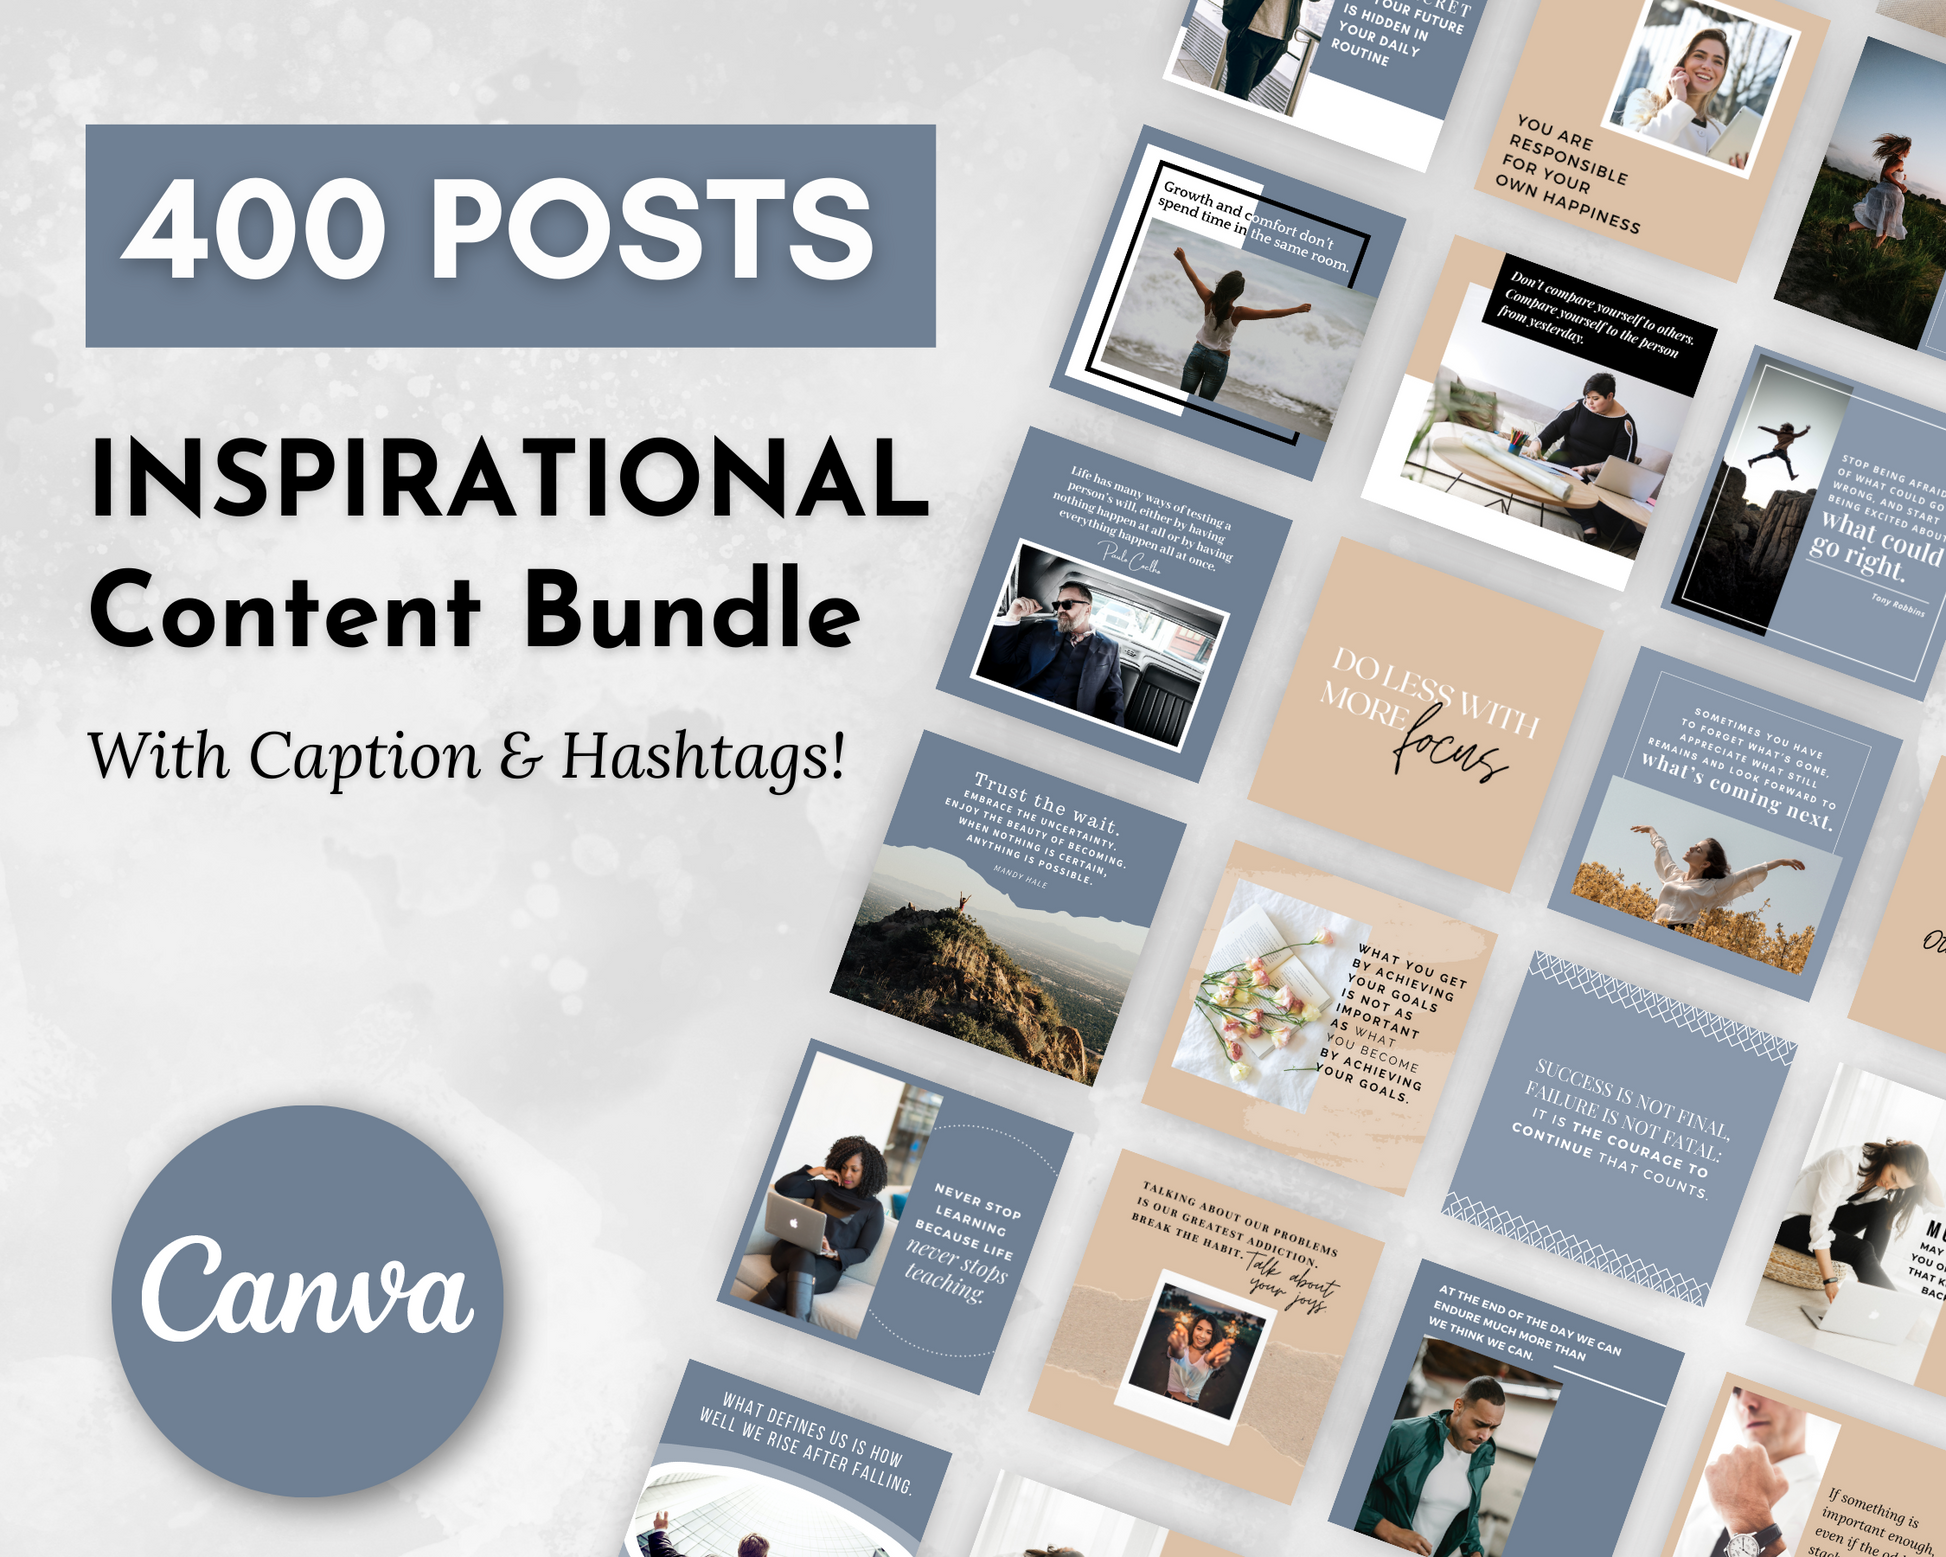 400 Inspirational Social Media Posts in SEO keywords, from the Socially Inclined Social Media Post Bundle with Canva Templates.